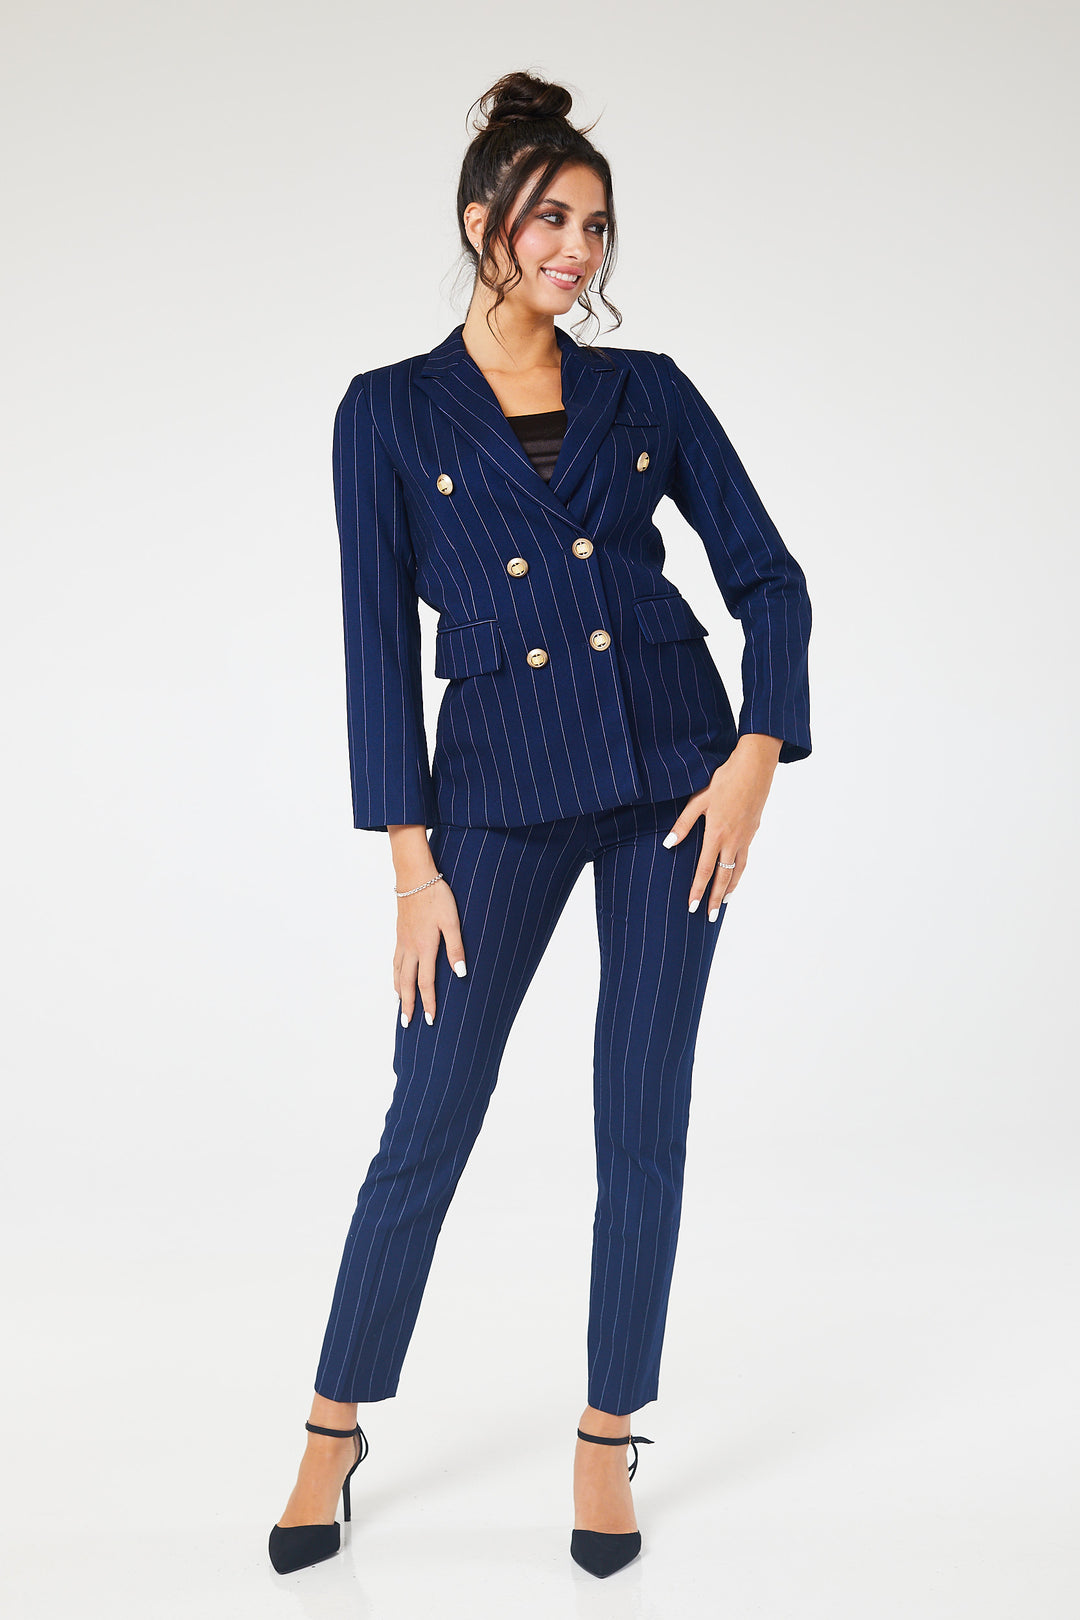 Navy Pinstriped Double Breasted 2-Piece Suit